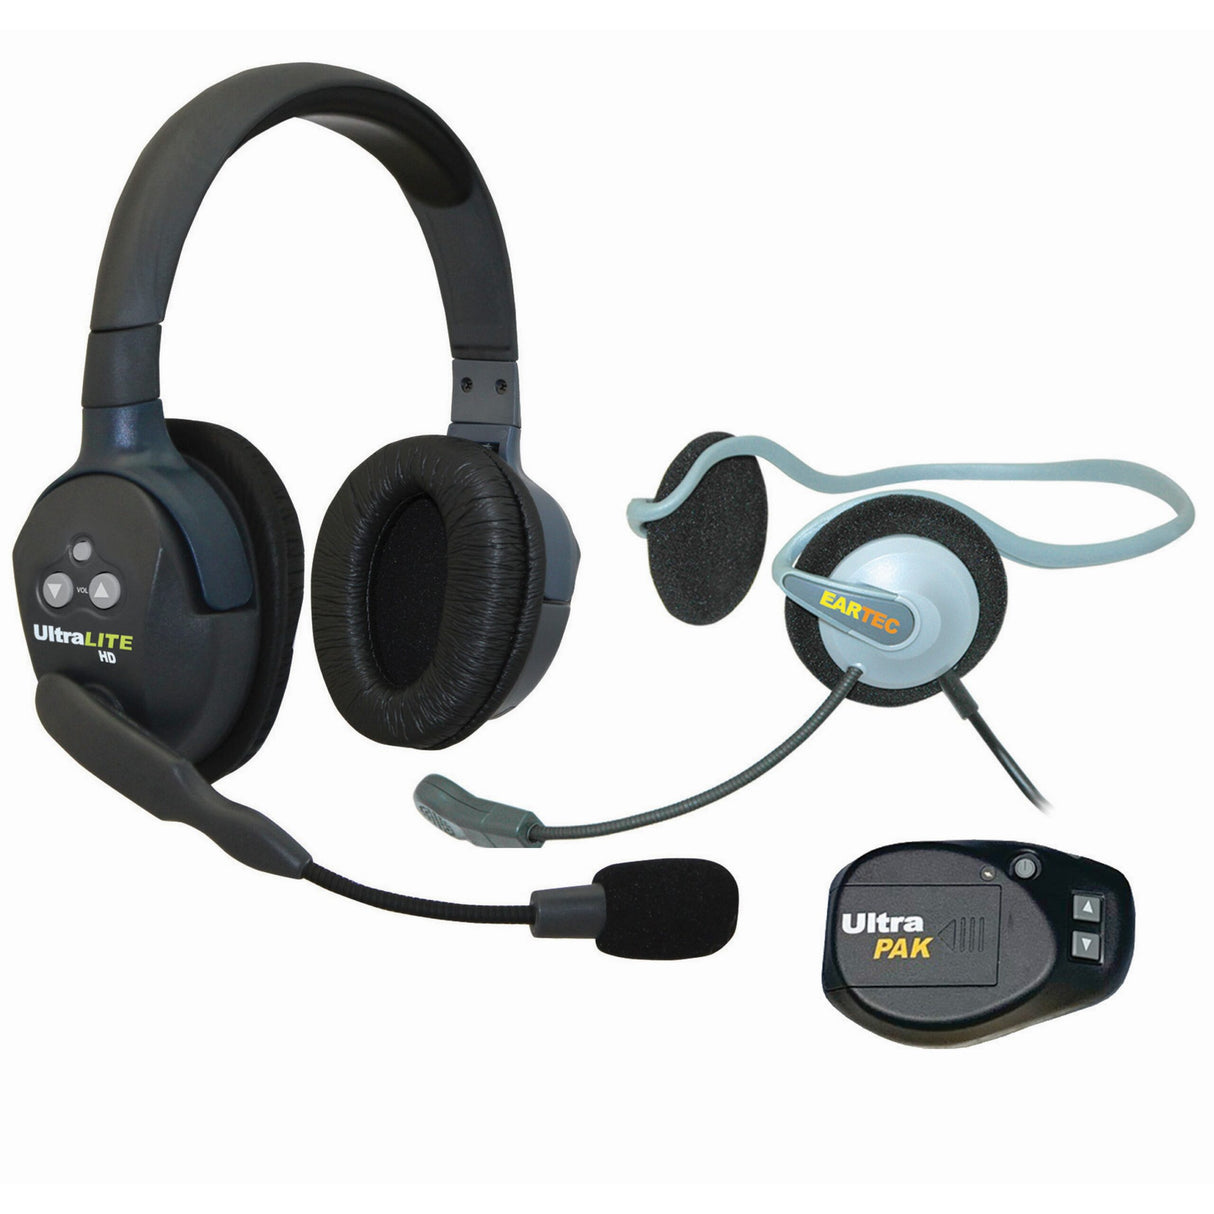 Eartec DMMON4 1 Double MAIN UltraLITE and 3 Monarch/UltraPAK Headsets